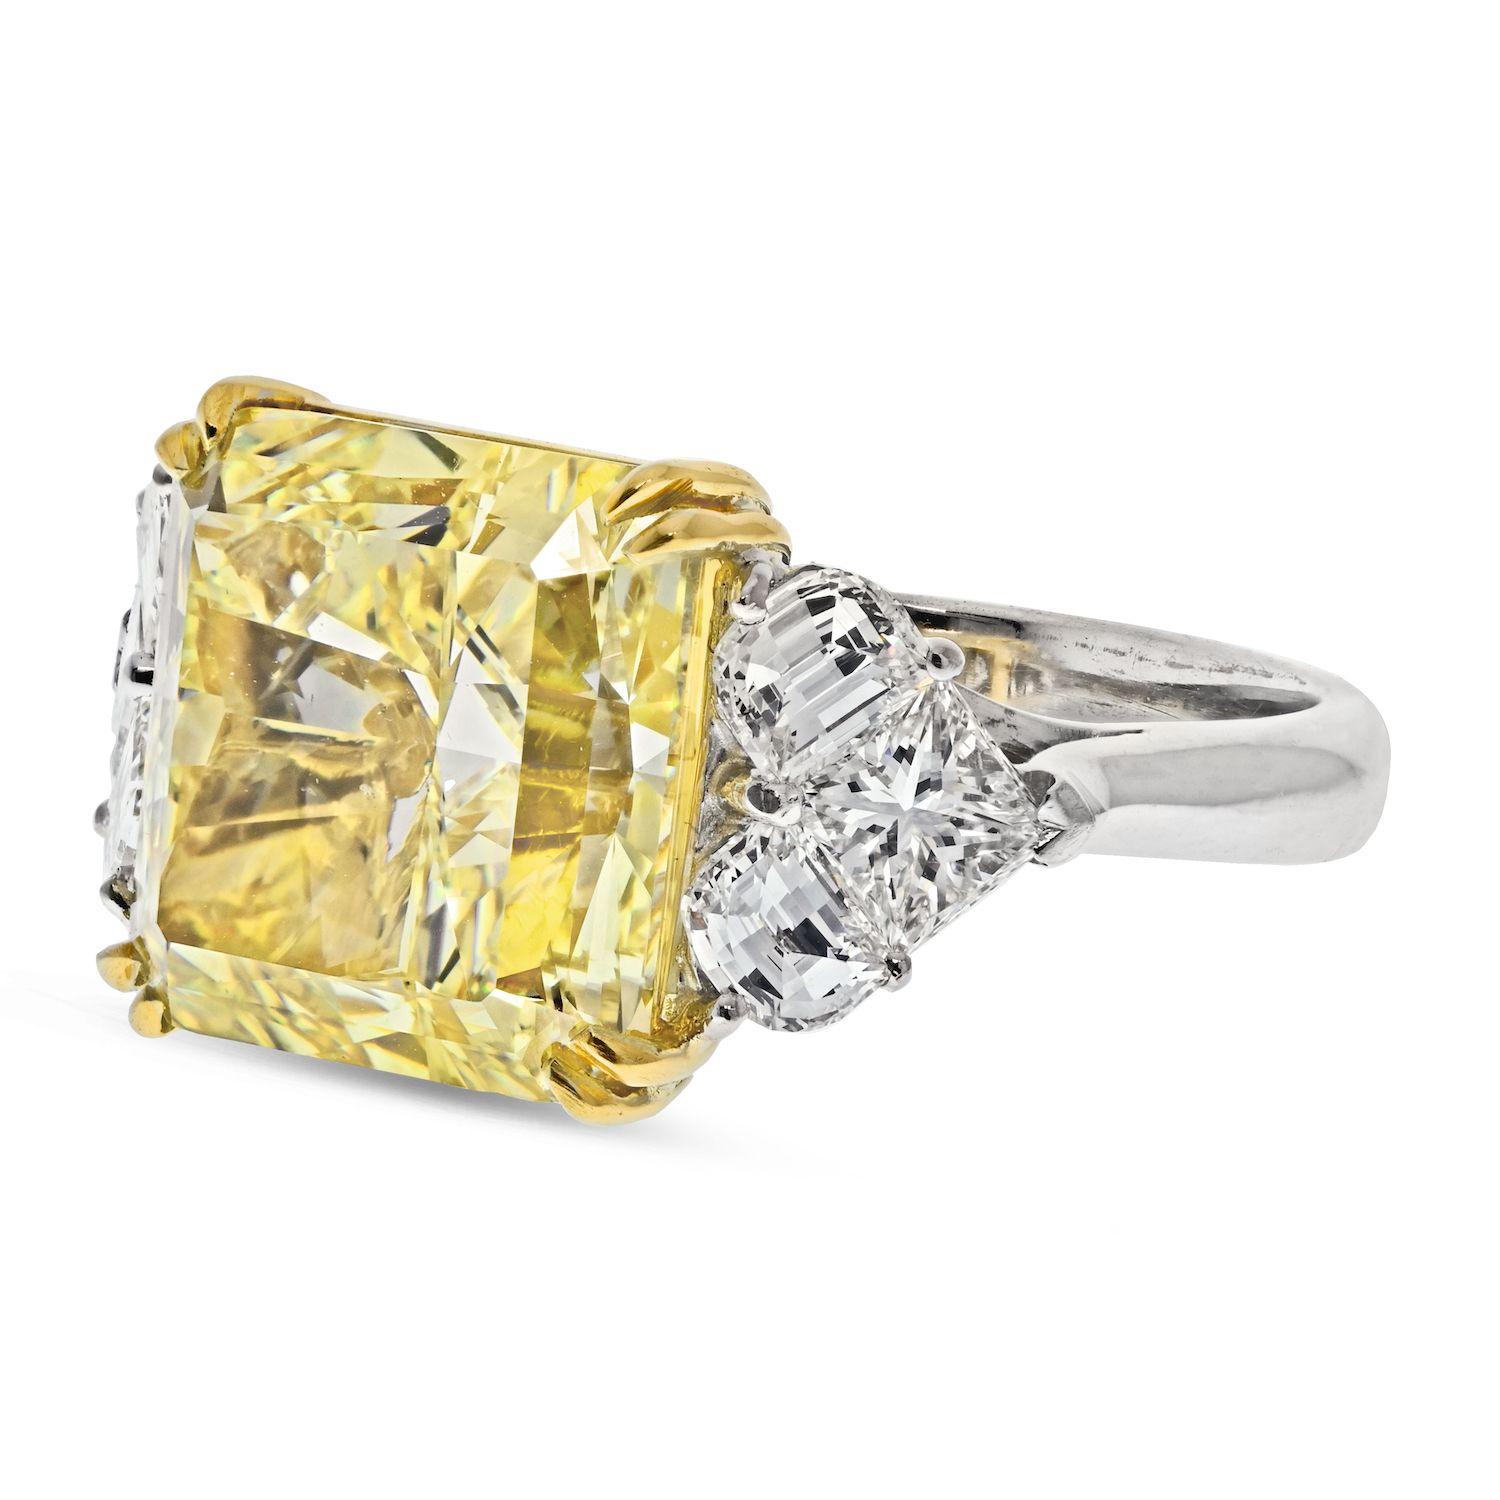 Women's 12.96 Carat Radiant Cut Diamond Fancy Yellow SI1 GIA Engagement Ring For Sale